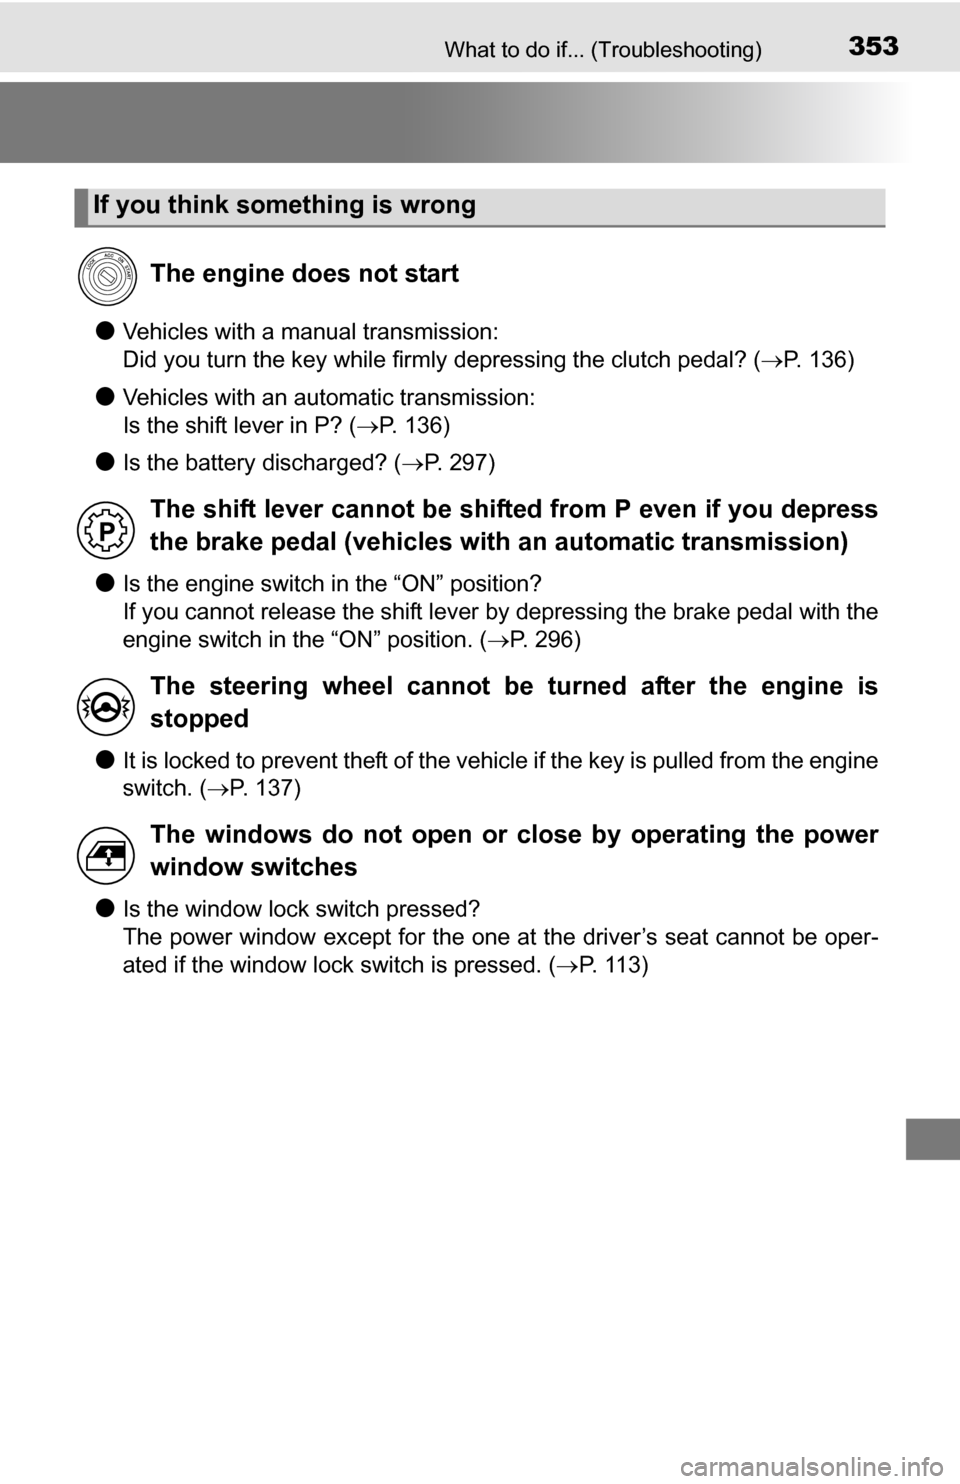 TOYOTA YARIS 2016 3.G Owners Guide 353What to do if... (Troubleshooting)
●Vehicles with a manual transmission: 
Did you turn the key while firmly depressing the clutch pedal? (P. 136)
●Vehicles with an automatic transmission: 
I